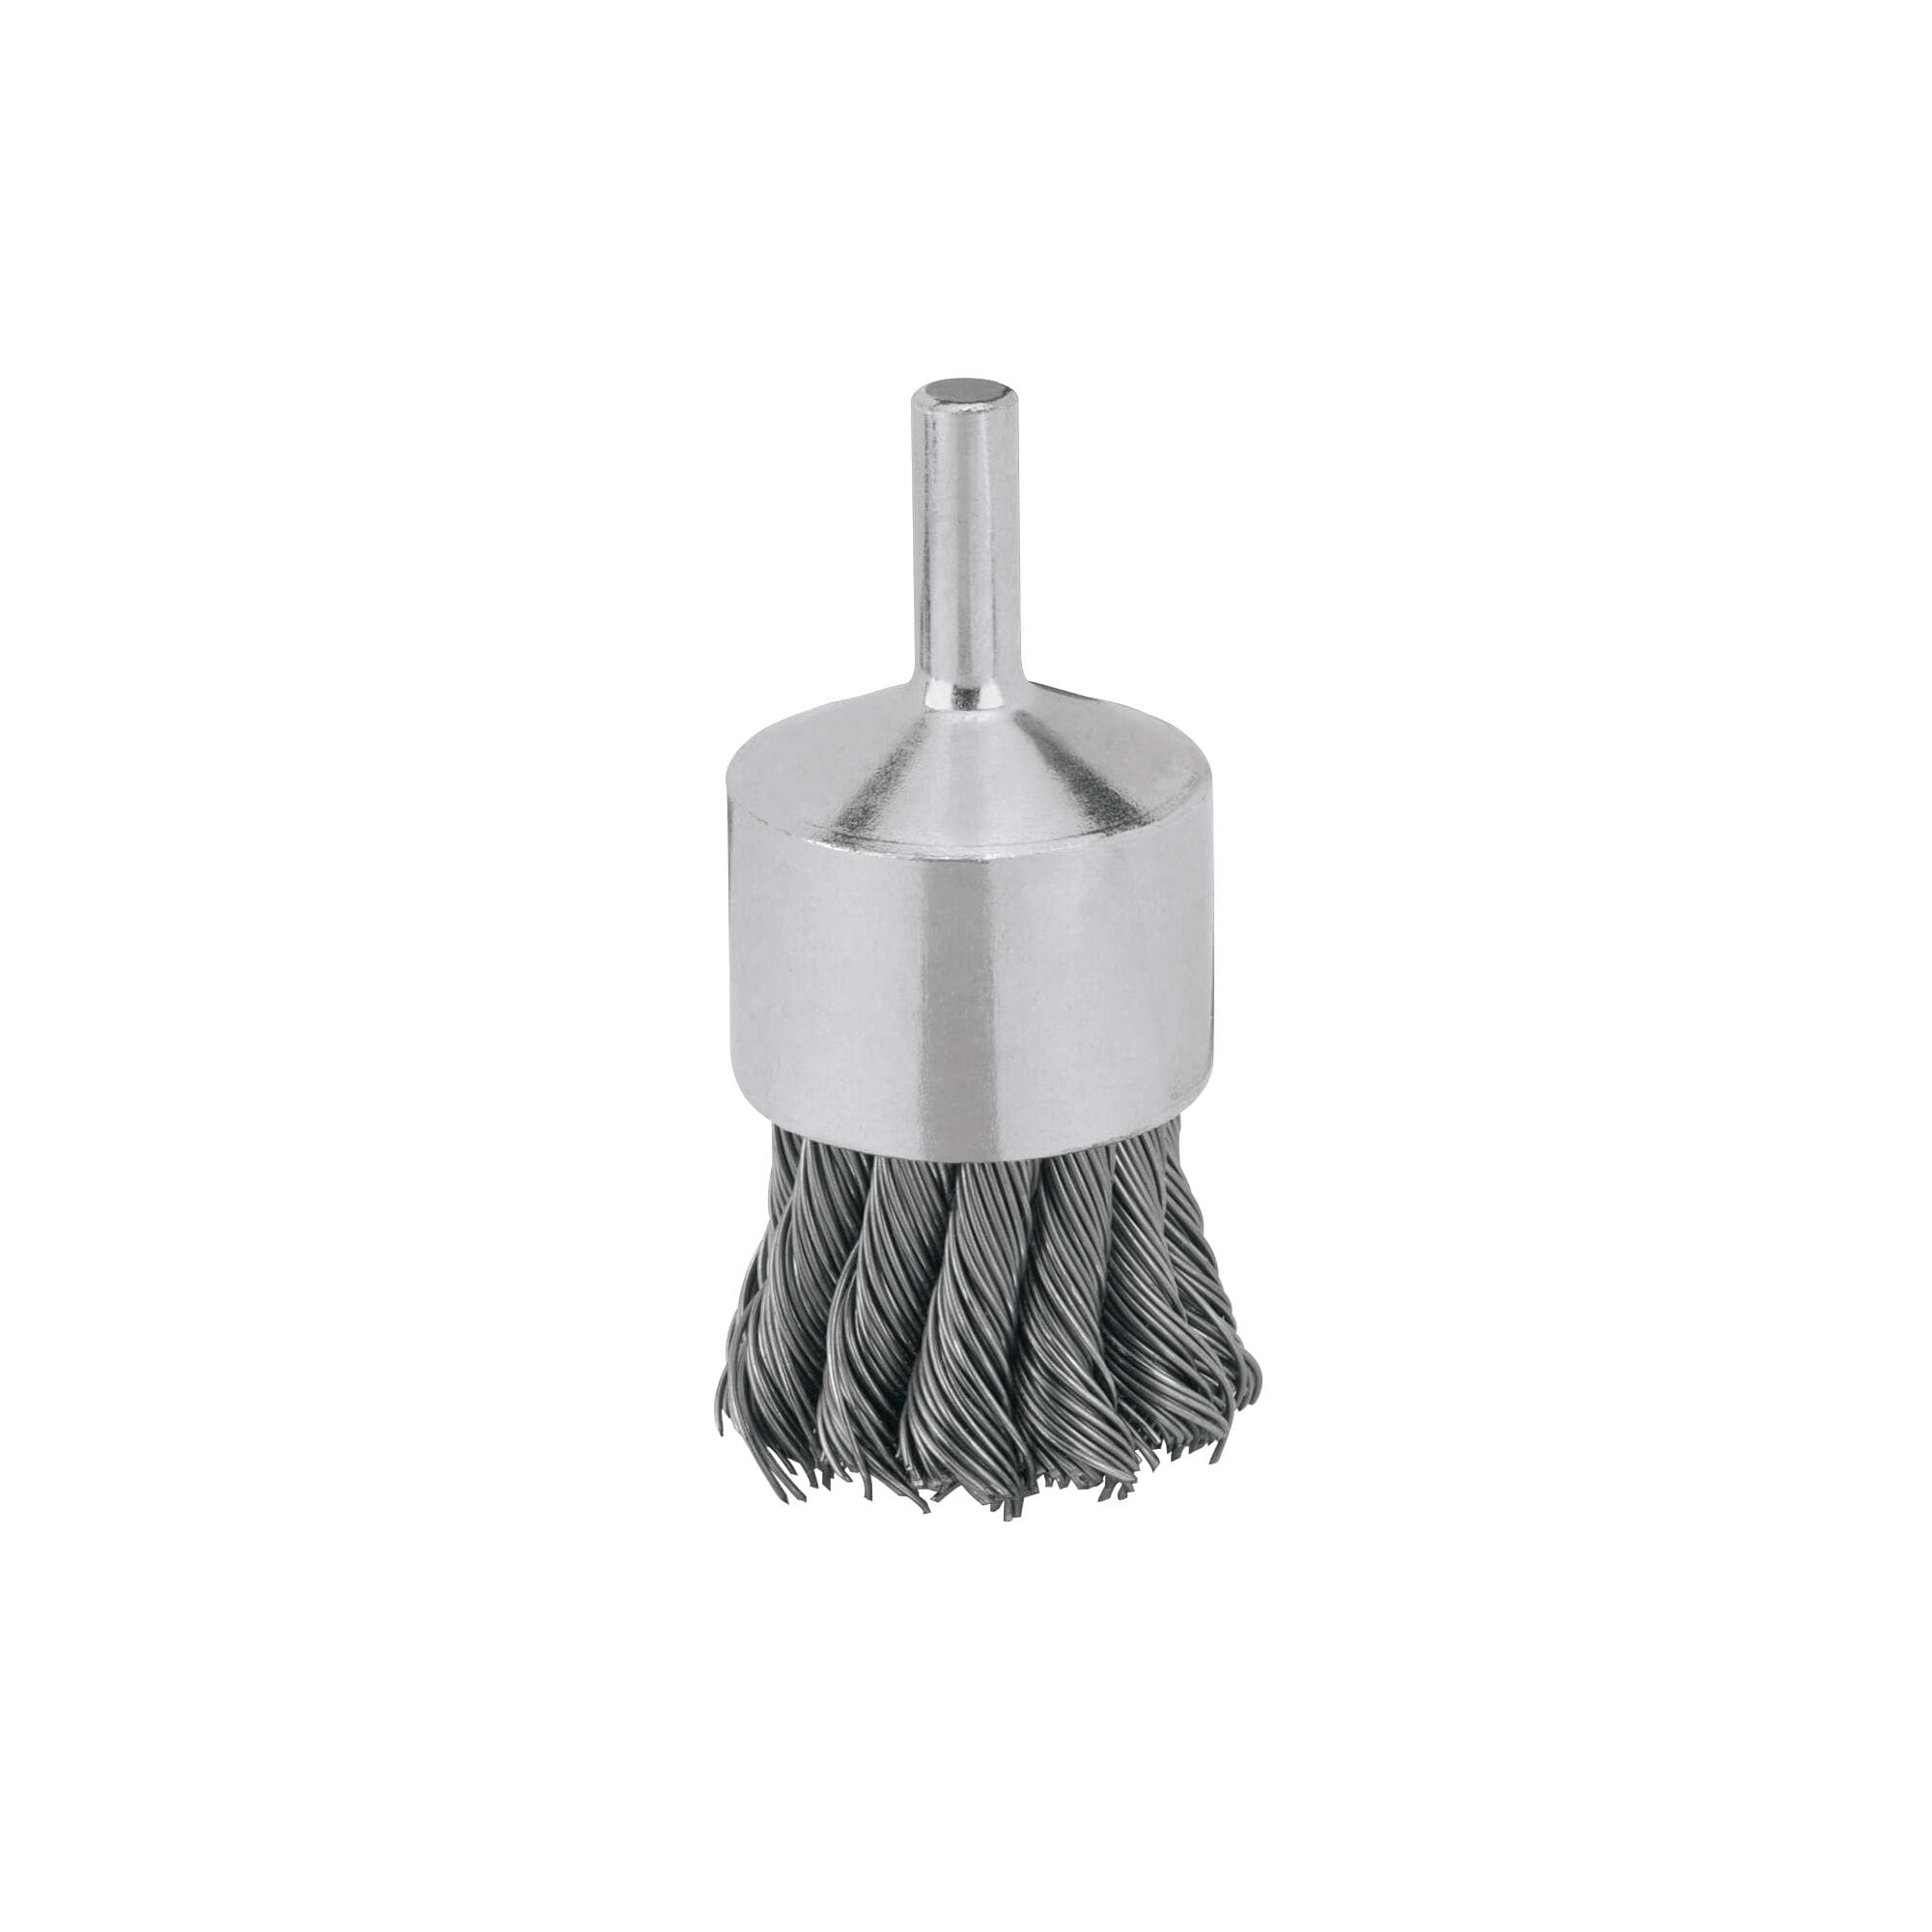 Extremely Thin Twisted Wire Brush - 1.0 cm diameter